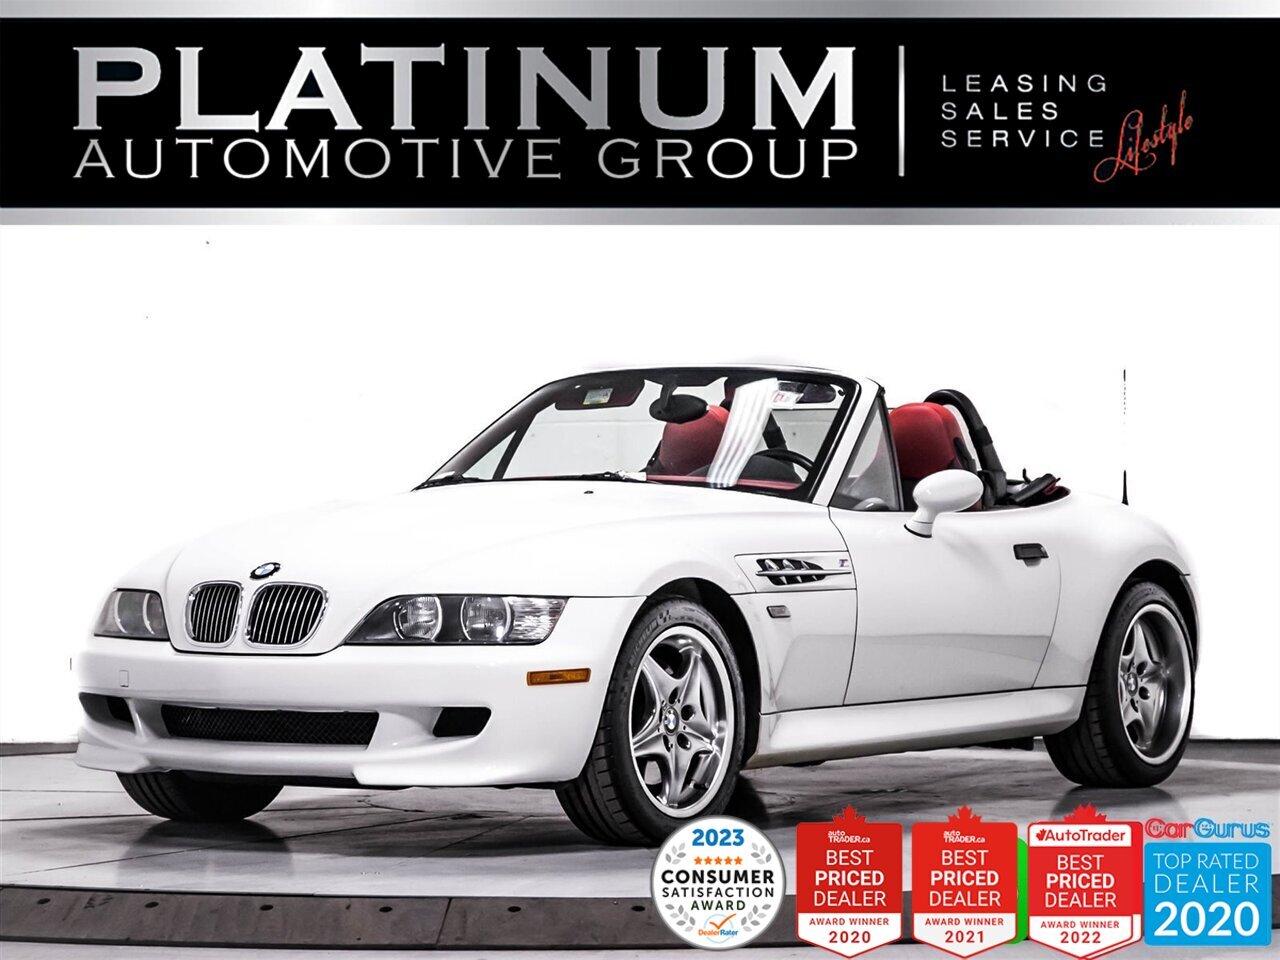 2002 BMW Z3 M Roadster, S54, 315HP, LSD, MANUAL, IMMACULATE